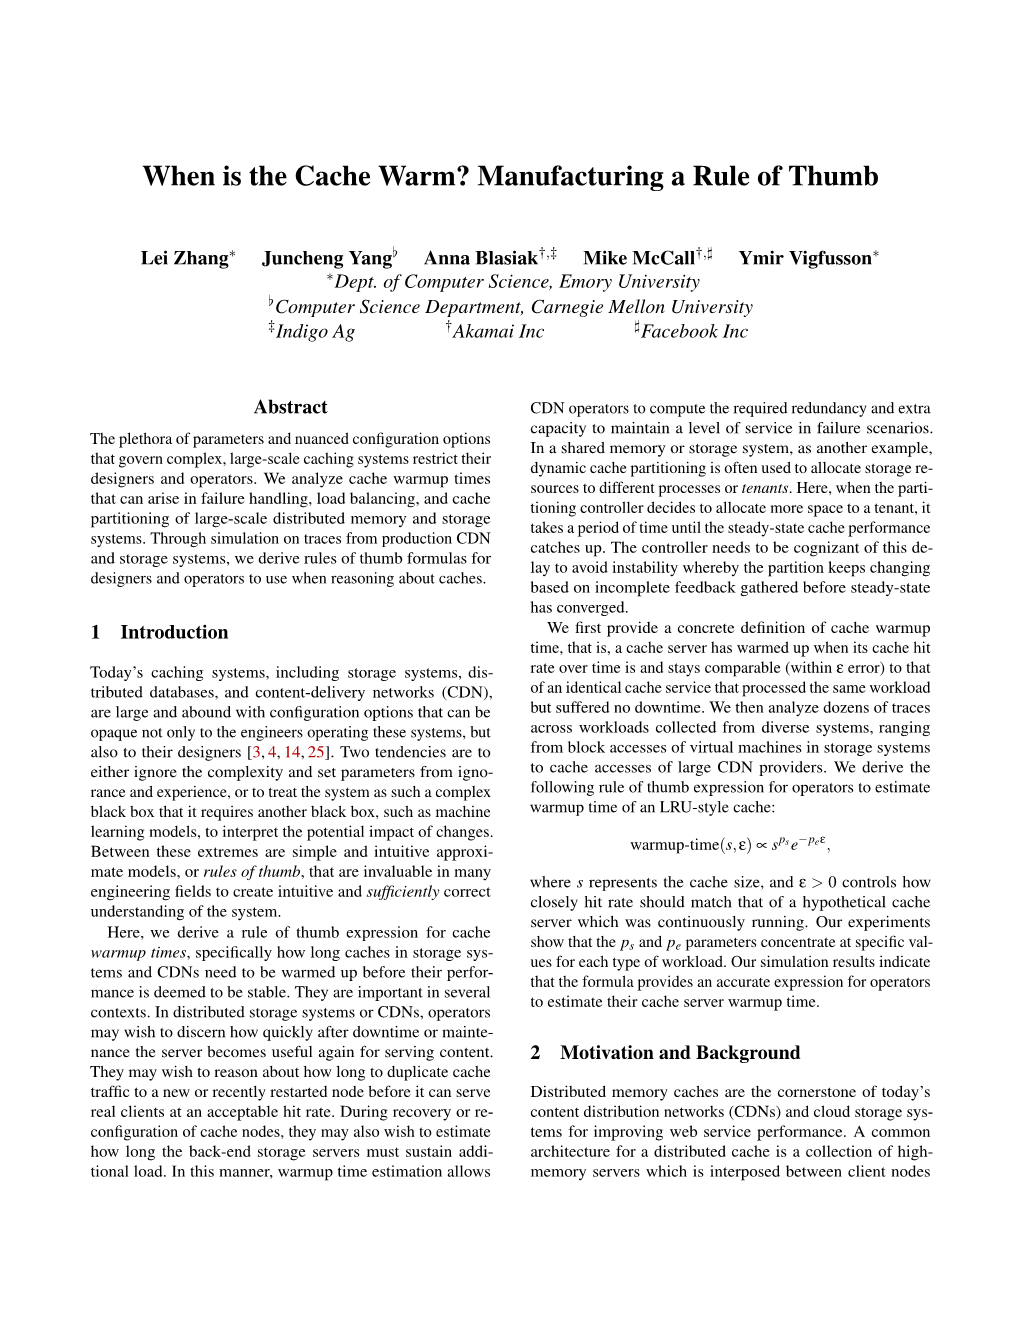 When Is the Cache Warm? Manufacturing a Rule of Thumb